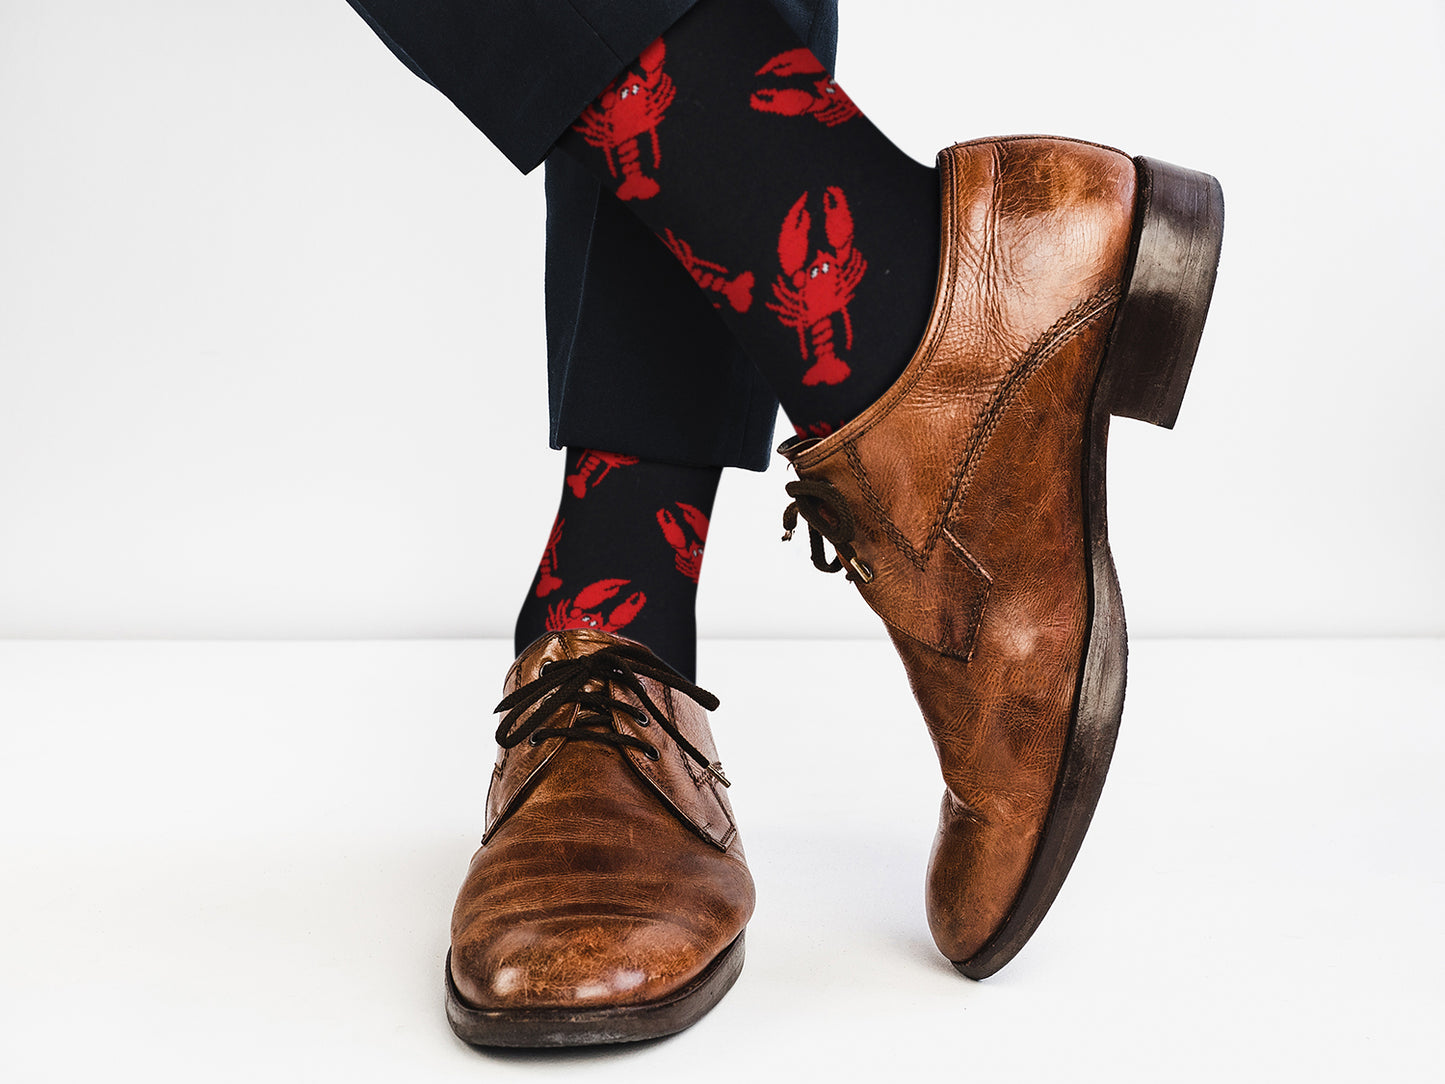 Seafood Dress Casual Socks – Lobster - For Men and Women